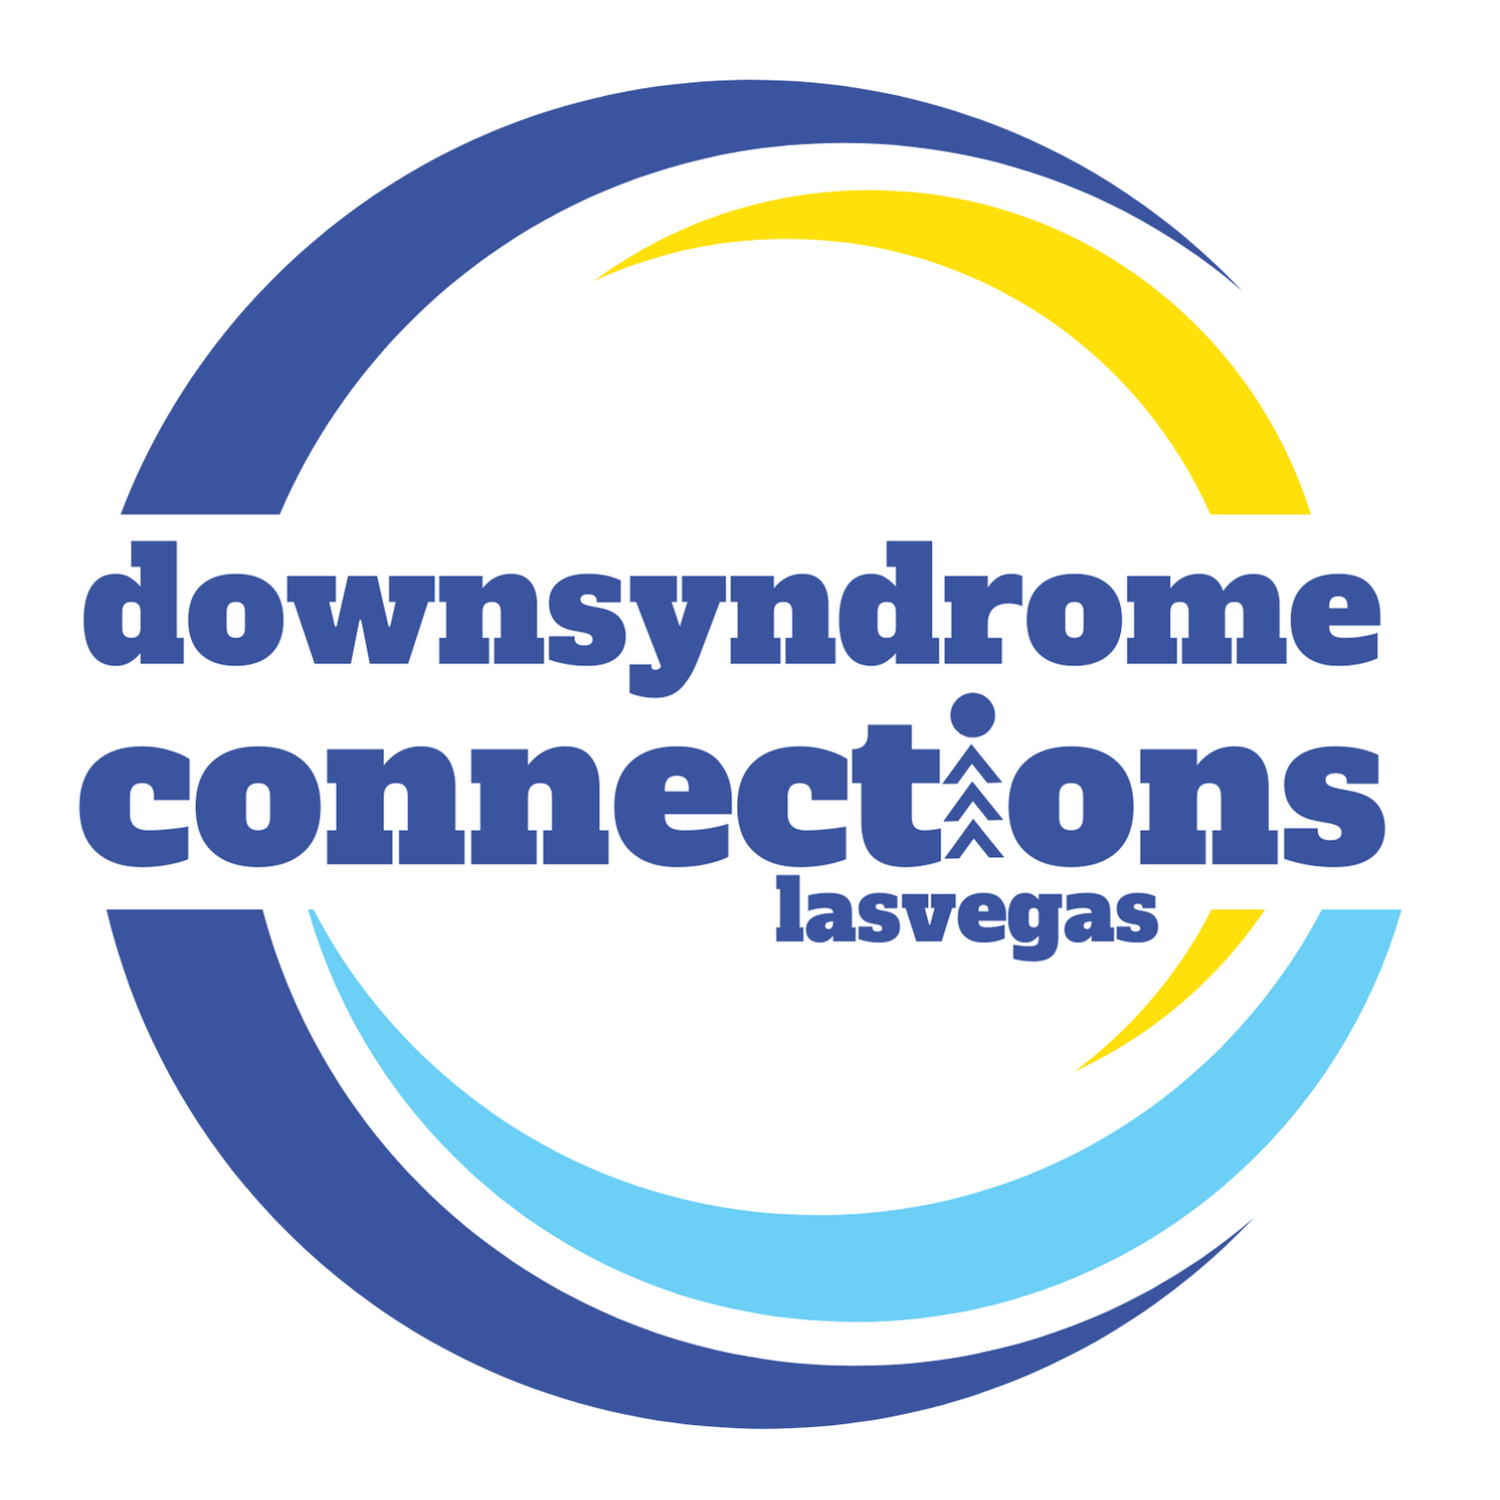 Down Syndrome Connections Las Vegas